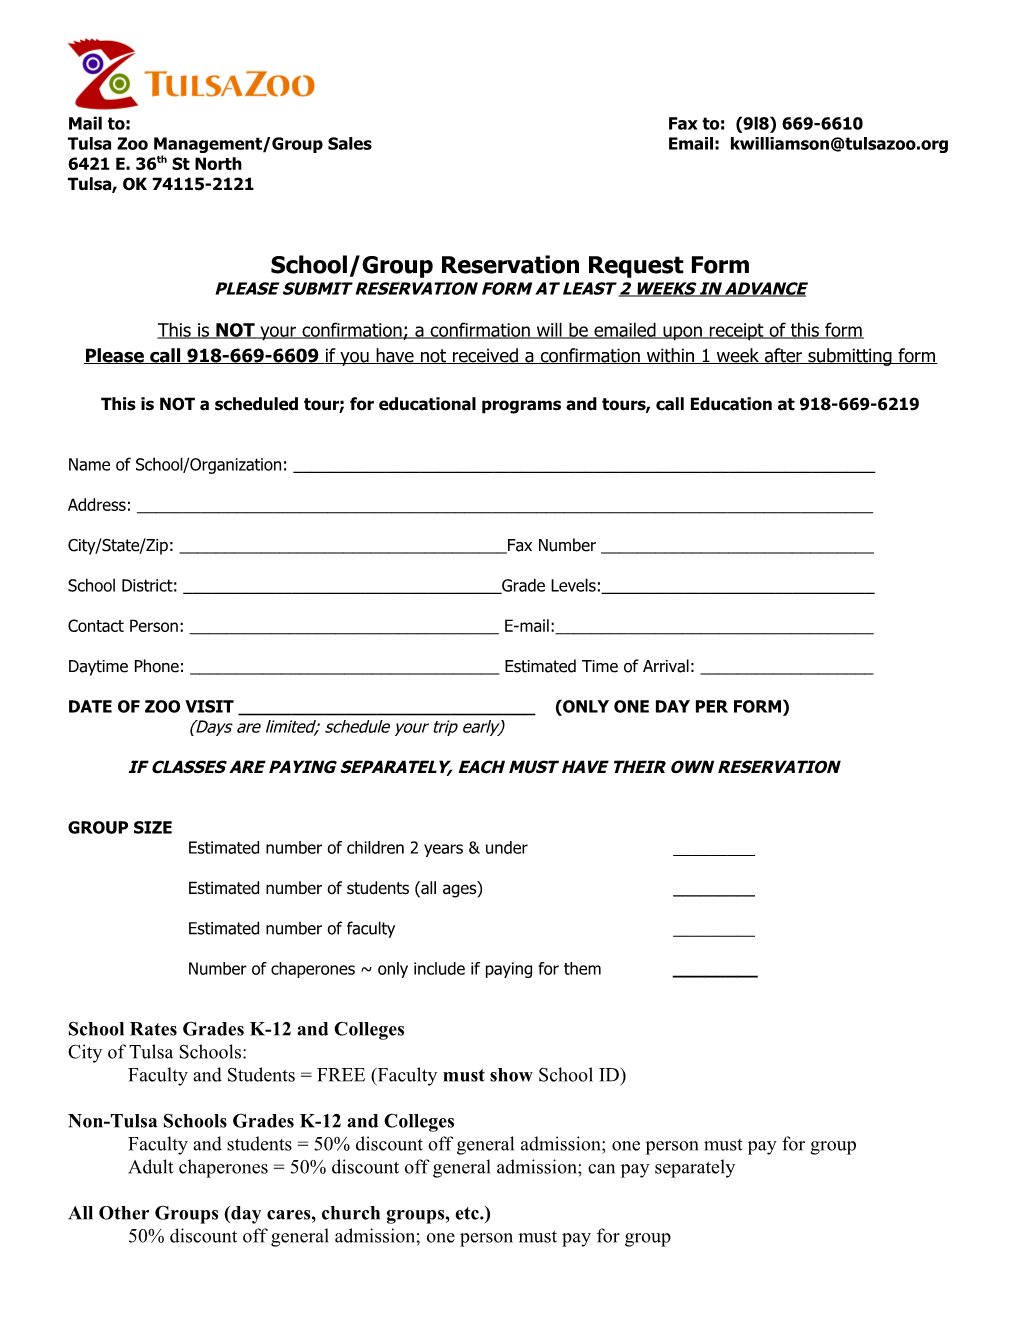 Tulsa Zoo Reservation Request Form